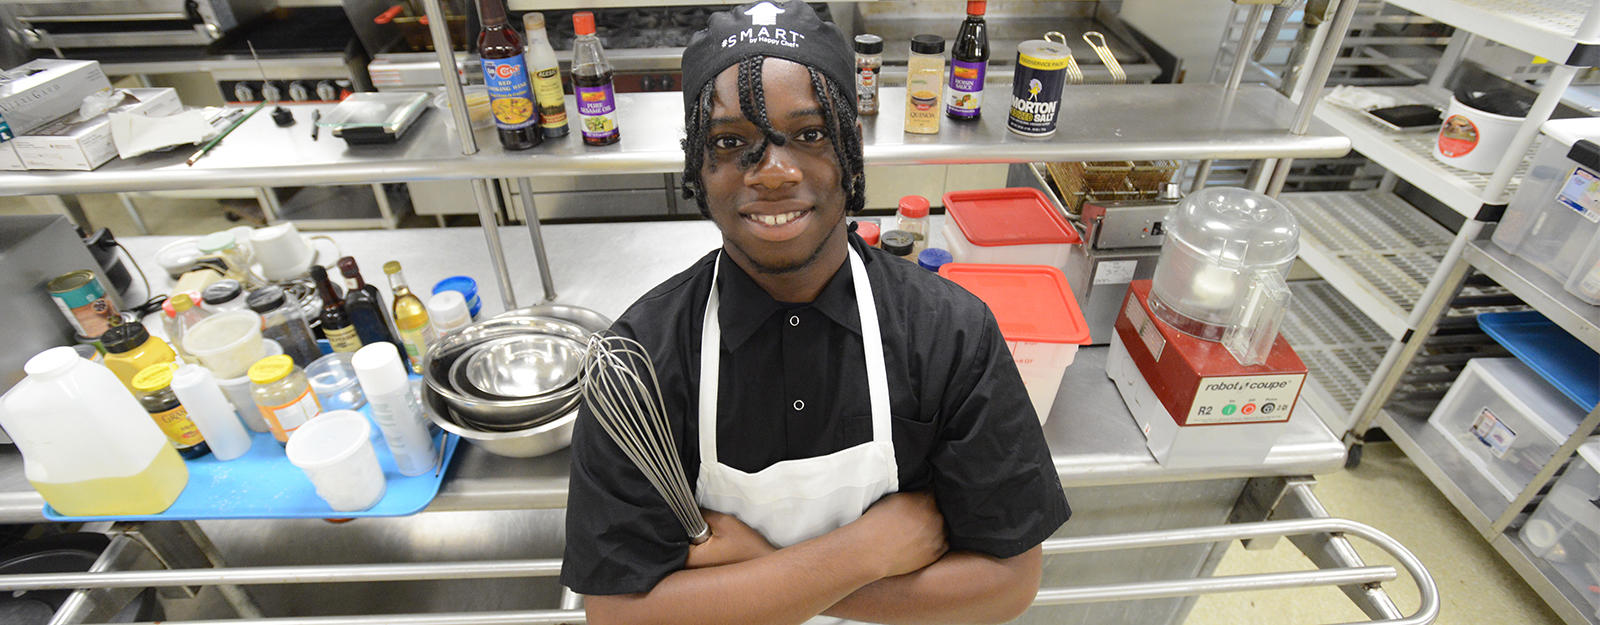 Culinary student posing for a picture in the kitchen.